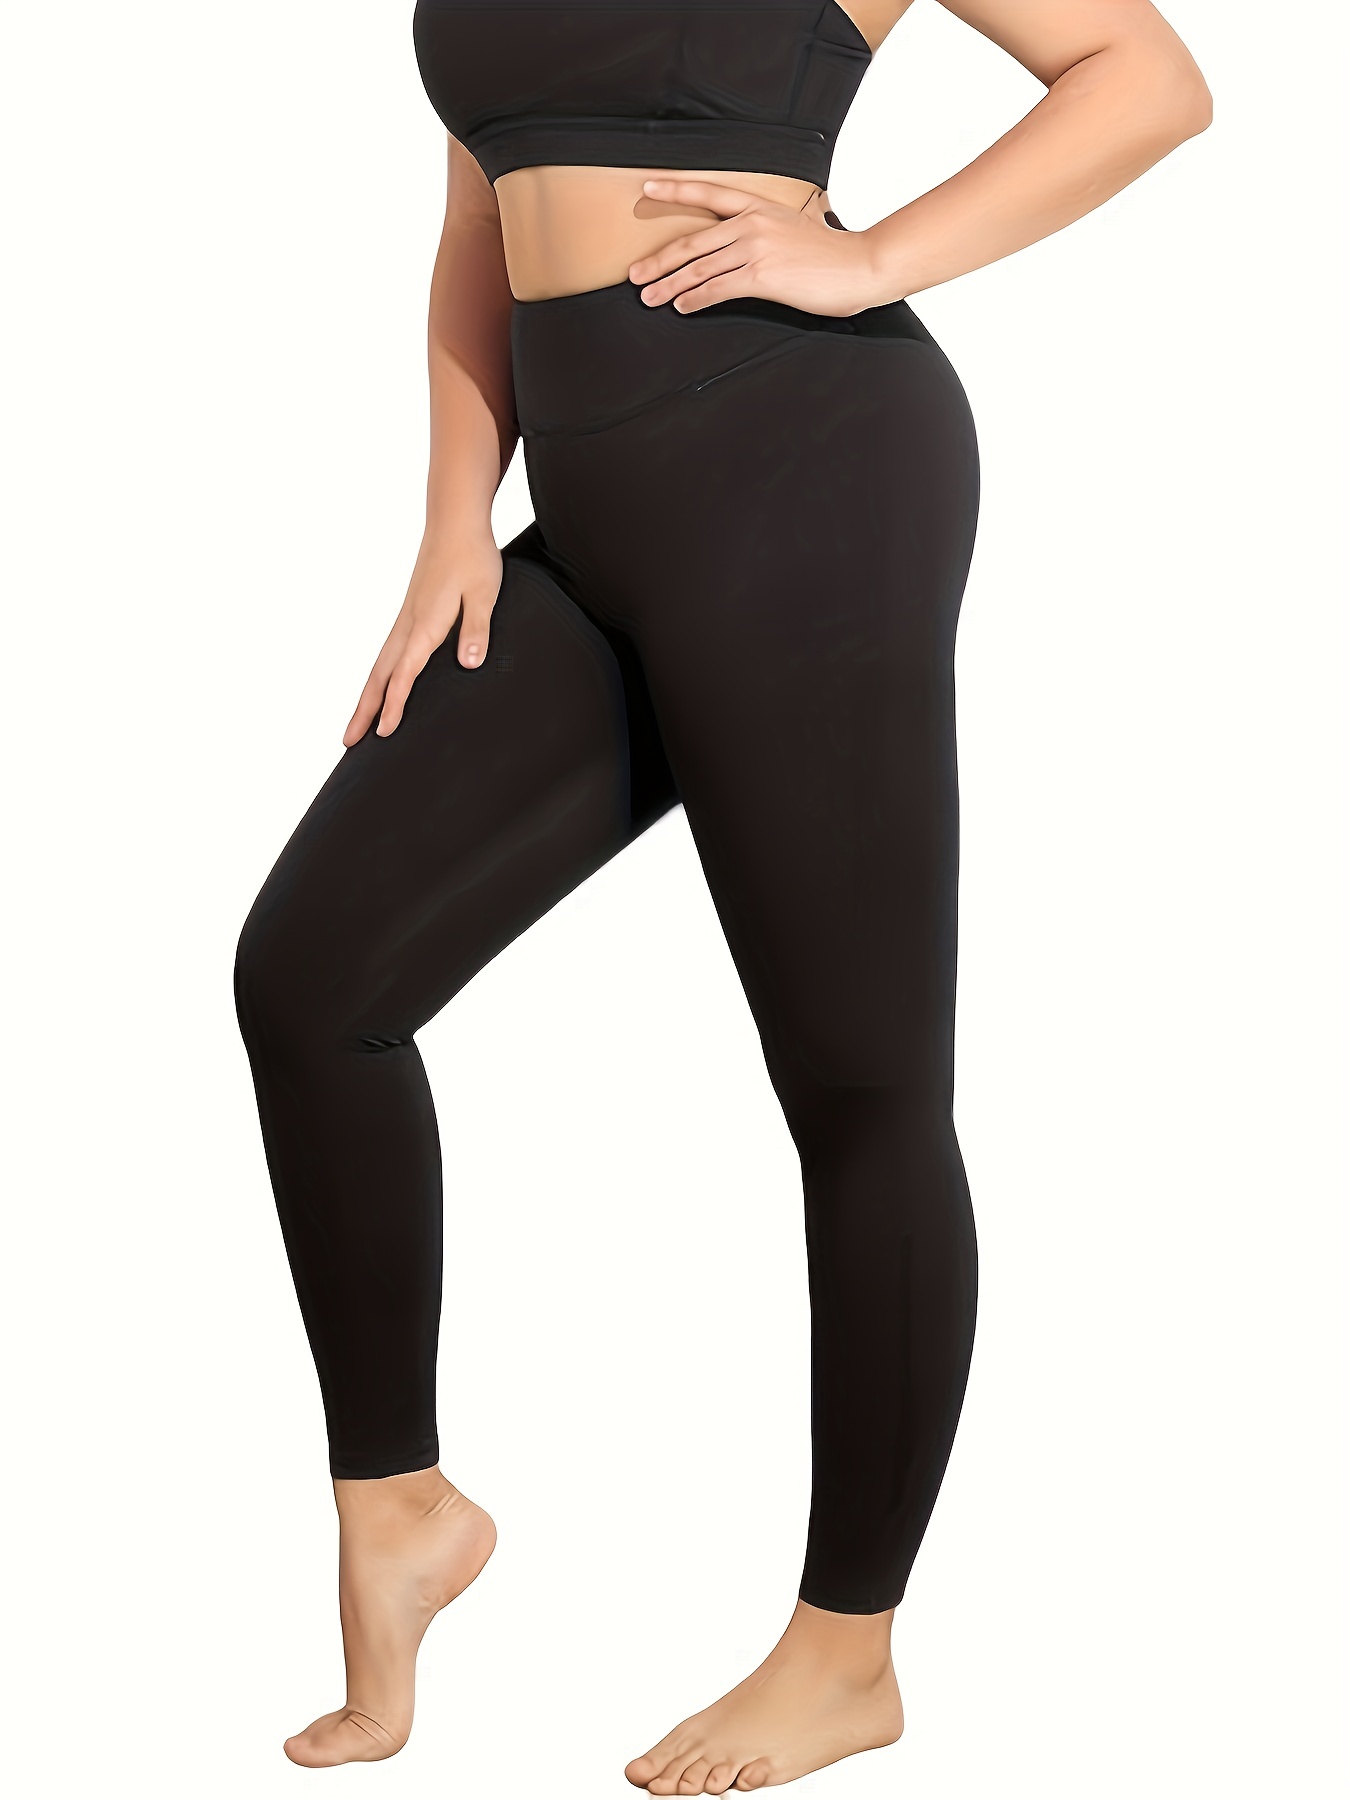  3 Pack Plus Size Leggings For Women - High Waist Stretchy Tummy  Control Pants For Workout Yoga Running Black/Black/Black